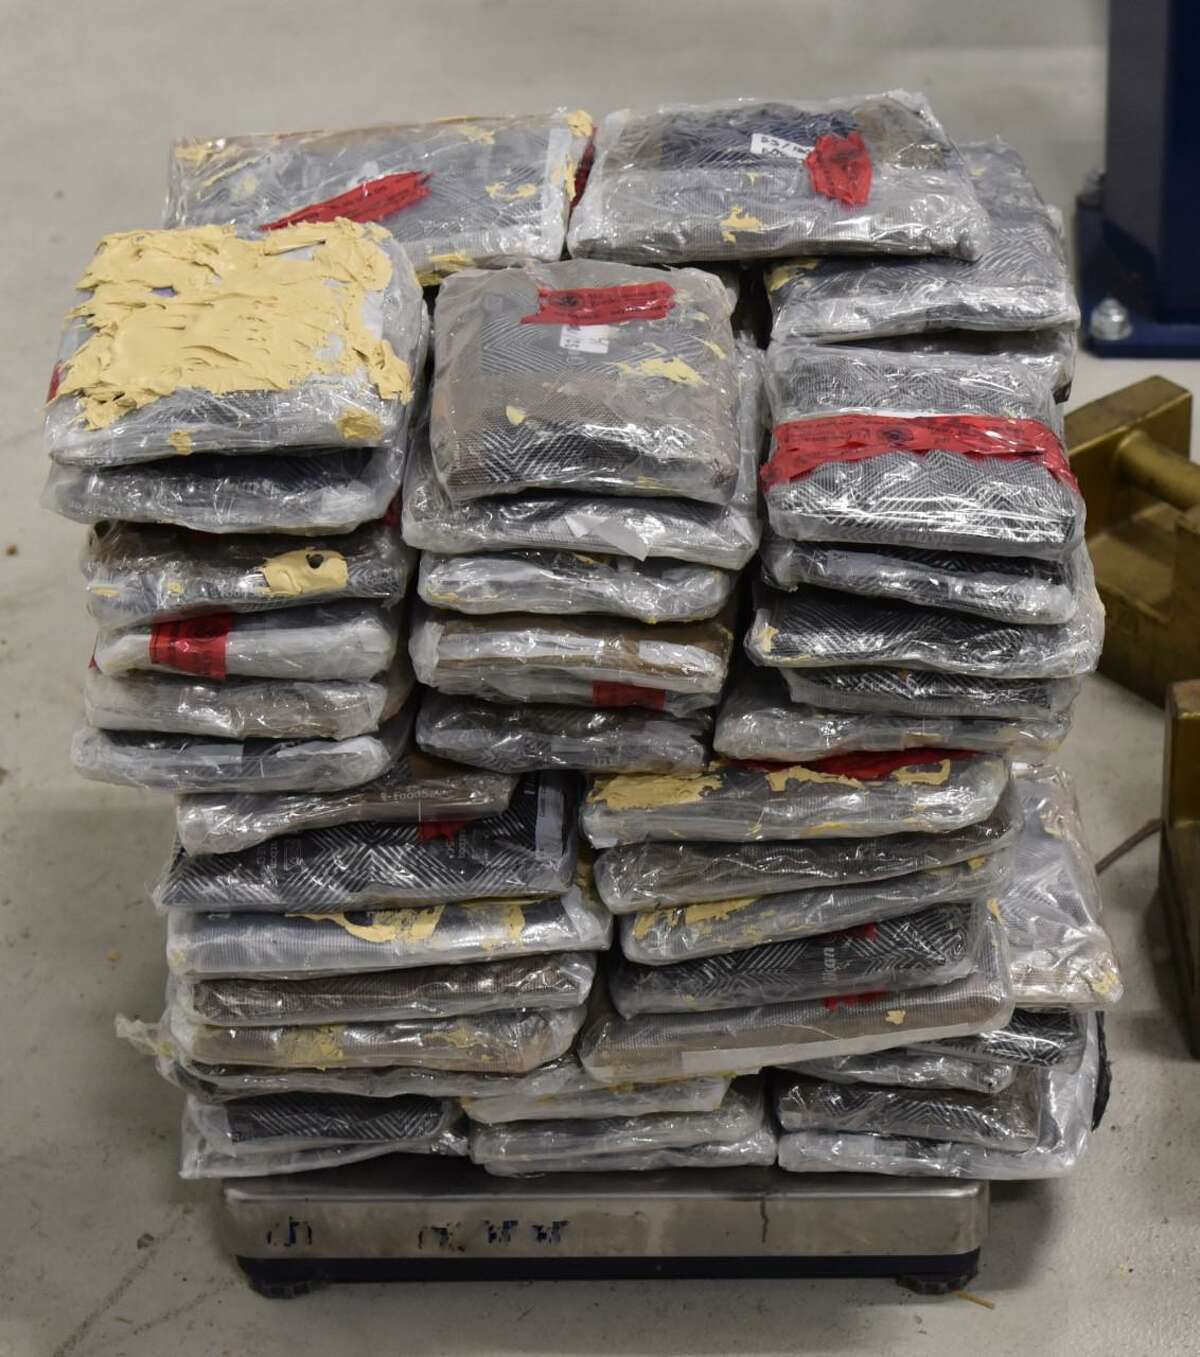 U.S. Customs and Border Protection officers recently seized these $2.5 million of meth at the Juarez-Lincoln International Bridge. A man was arrested in connection with the case.